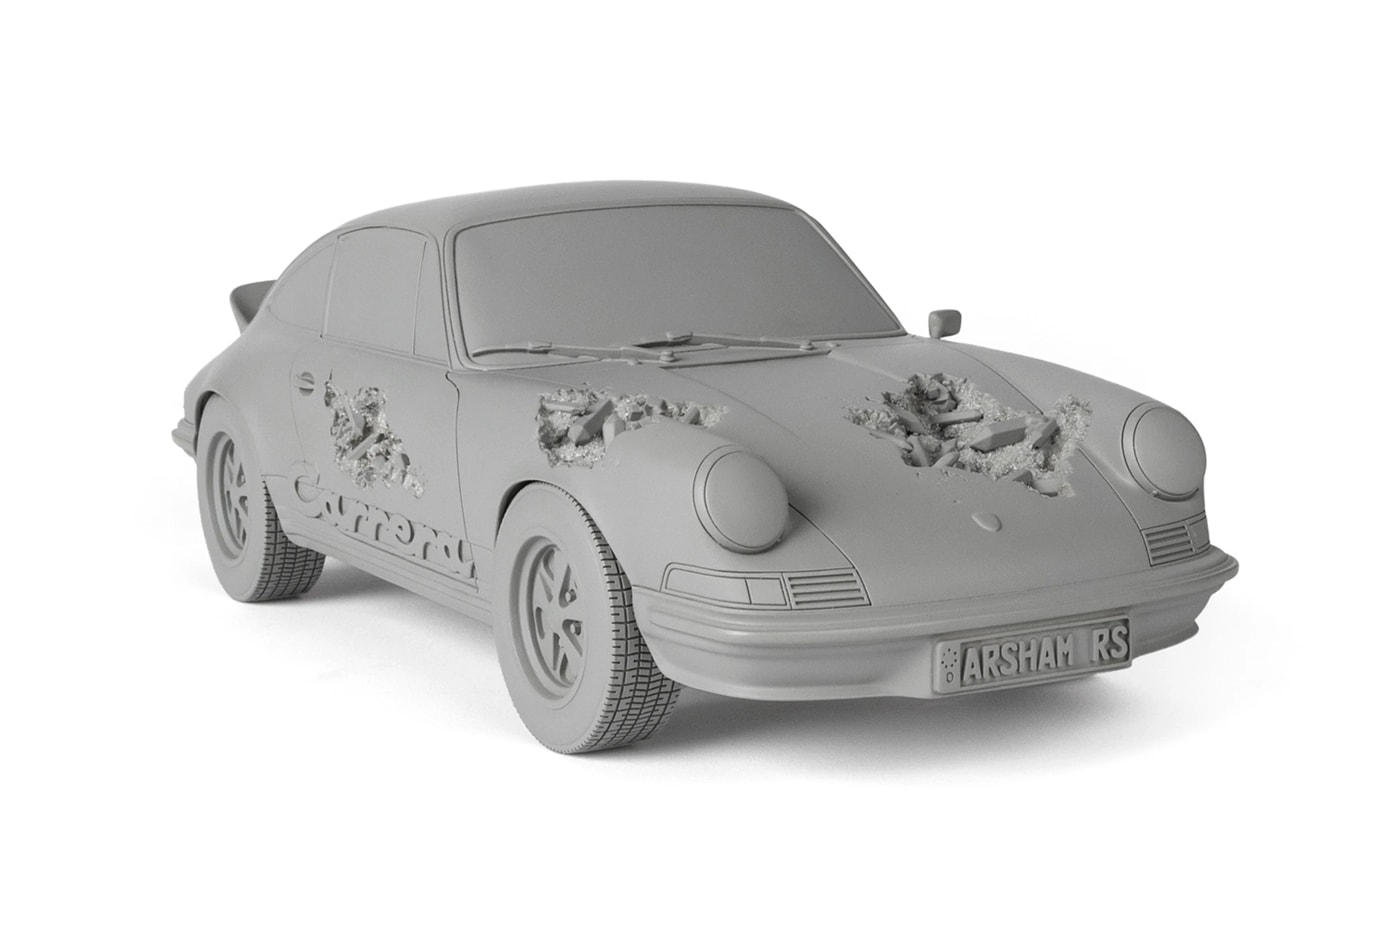 Daniel Arsham Eroded 1973 Porsche 911 Carrera RS 2.7 Touring crystel erosion Sculptures Arshams Editions holographic verification label collectible model sportscar space clay grey release info 